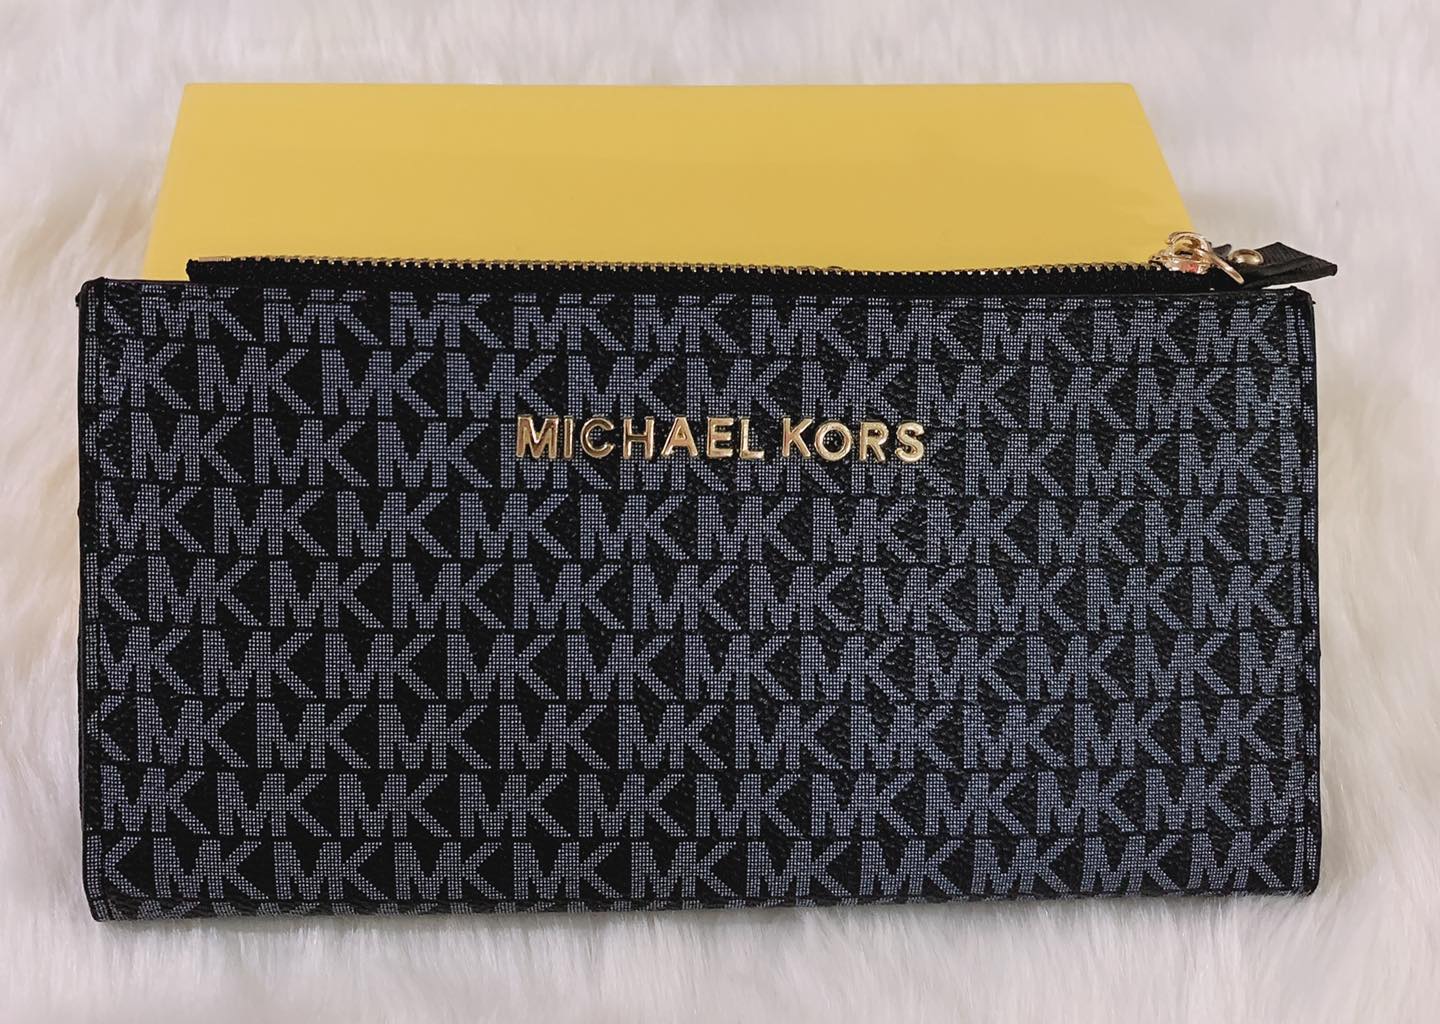 DK MK Kors Wallet Zipper Authentic Quality With Box On Sale | Lazada PH